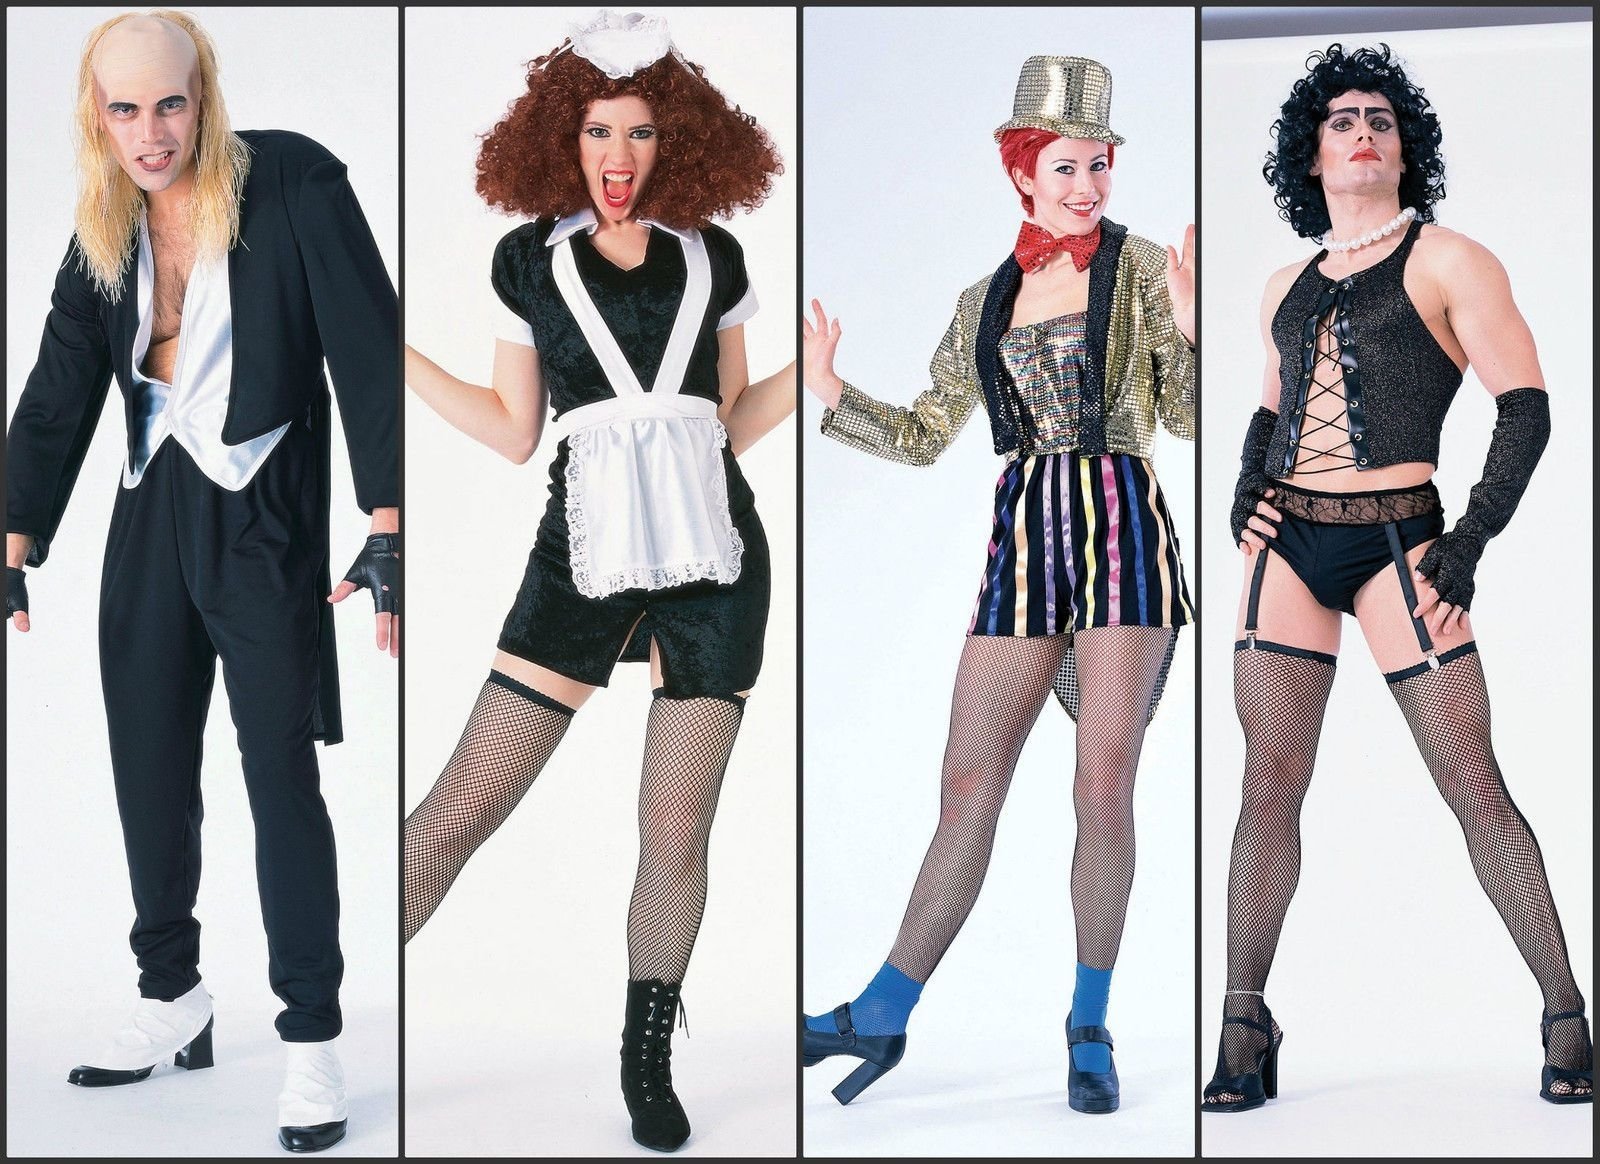 Stylish Rocky Horror Picture Show Costume Ideas